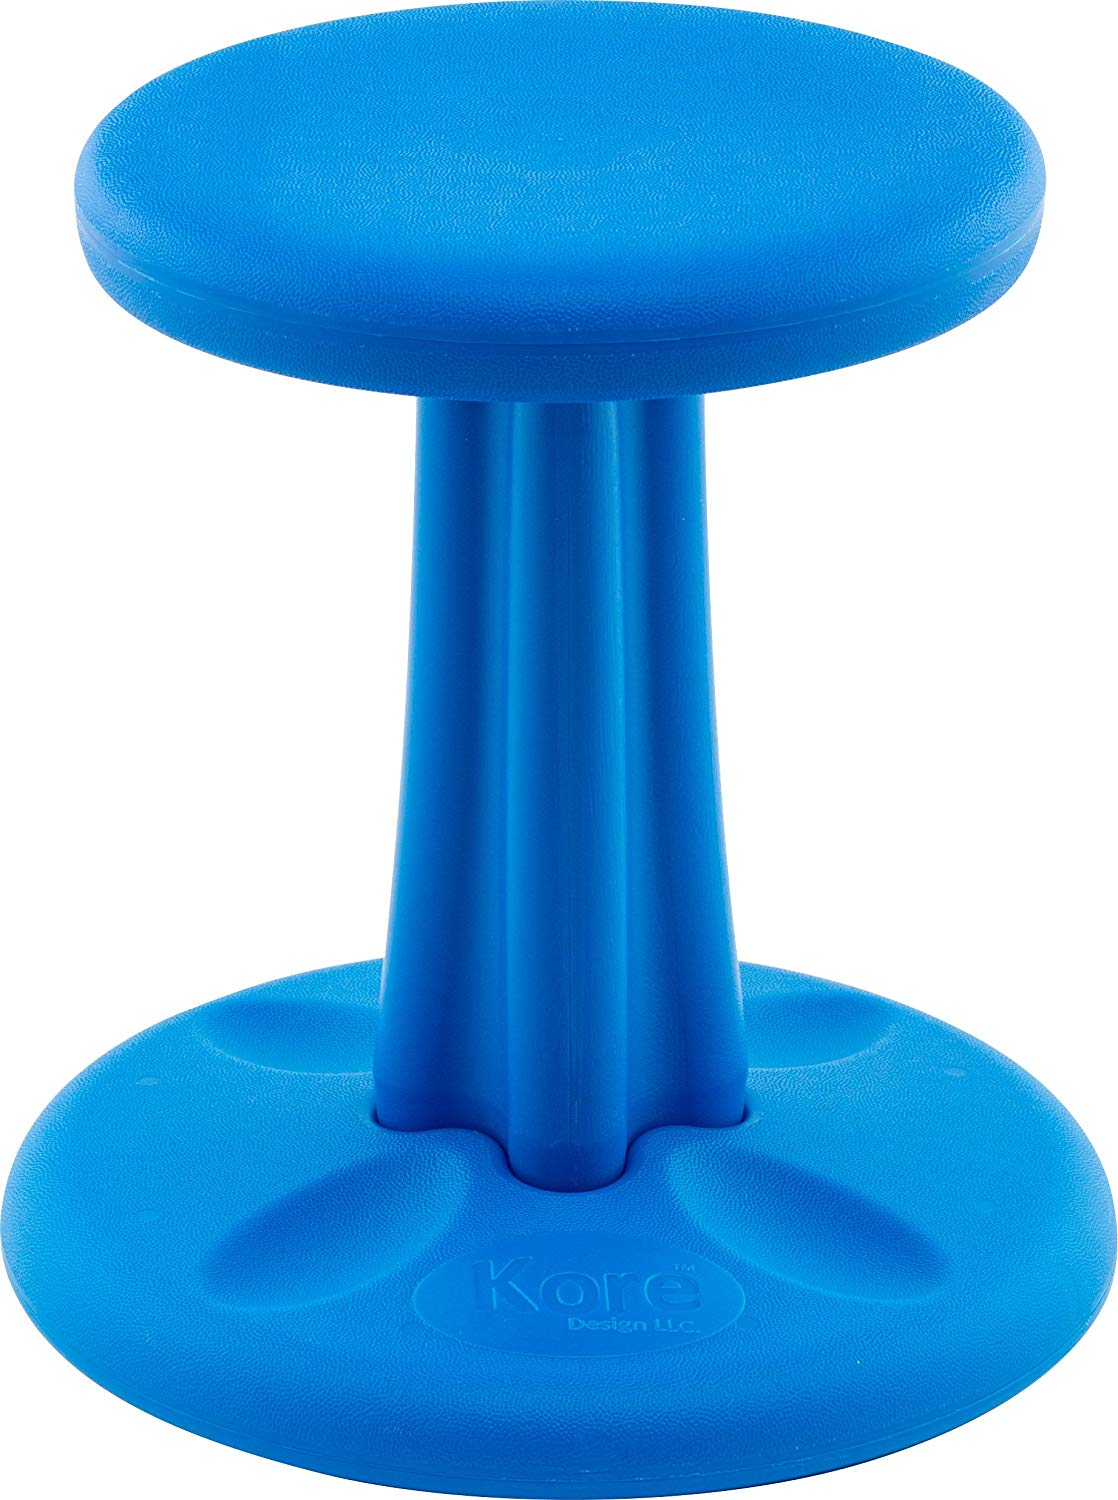 14" Kore Wobble Chair,  Select Color Upon Ordering